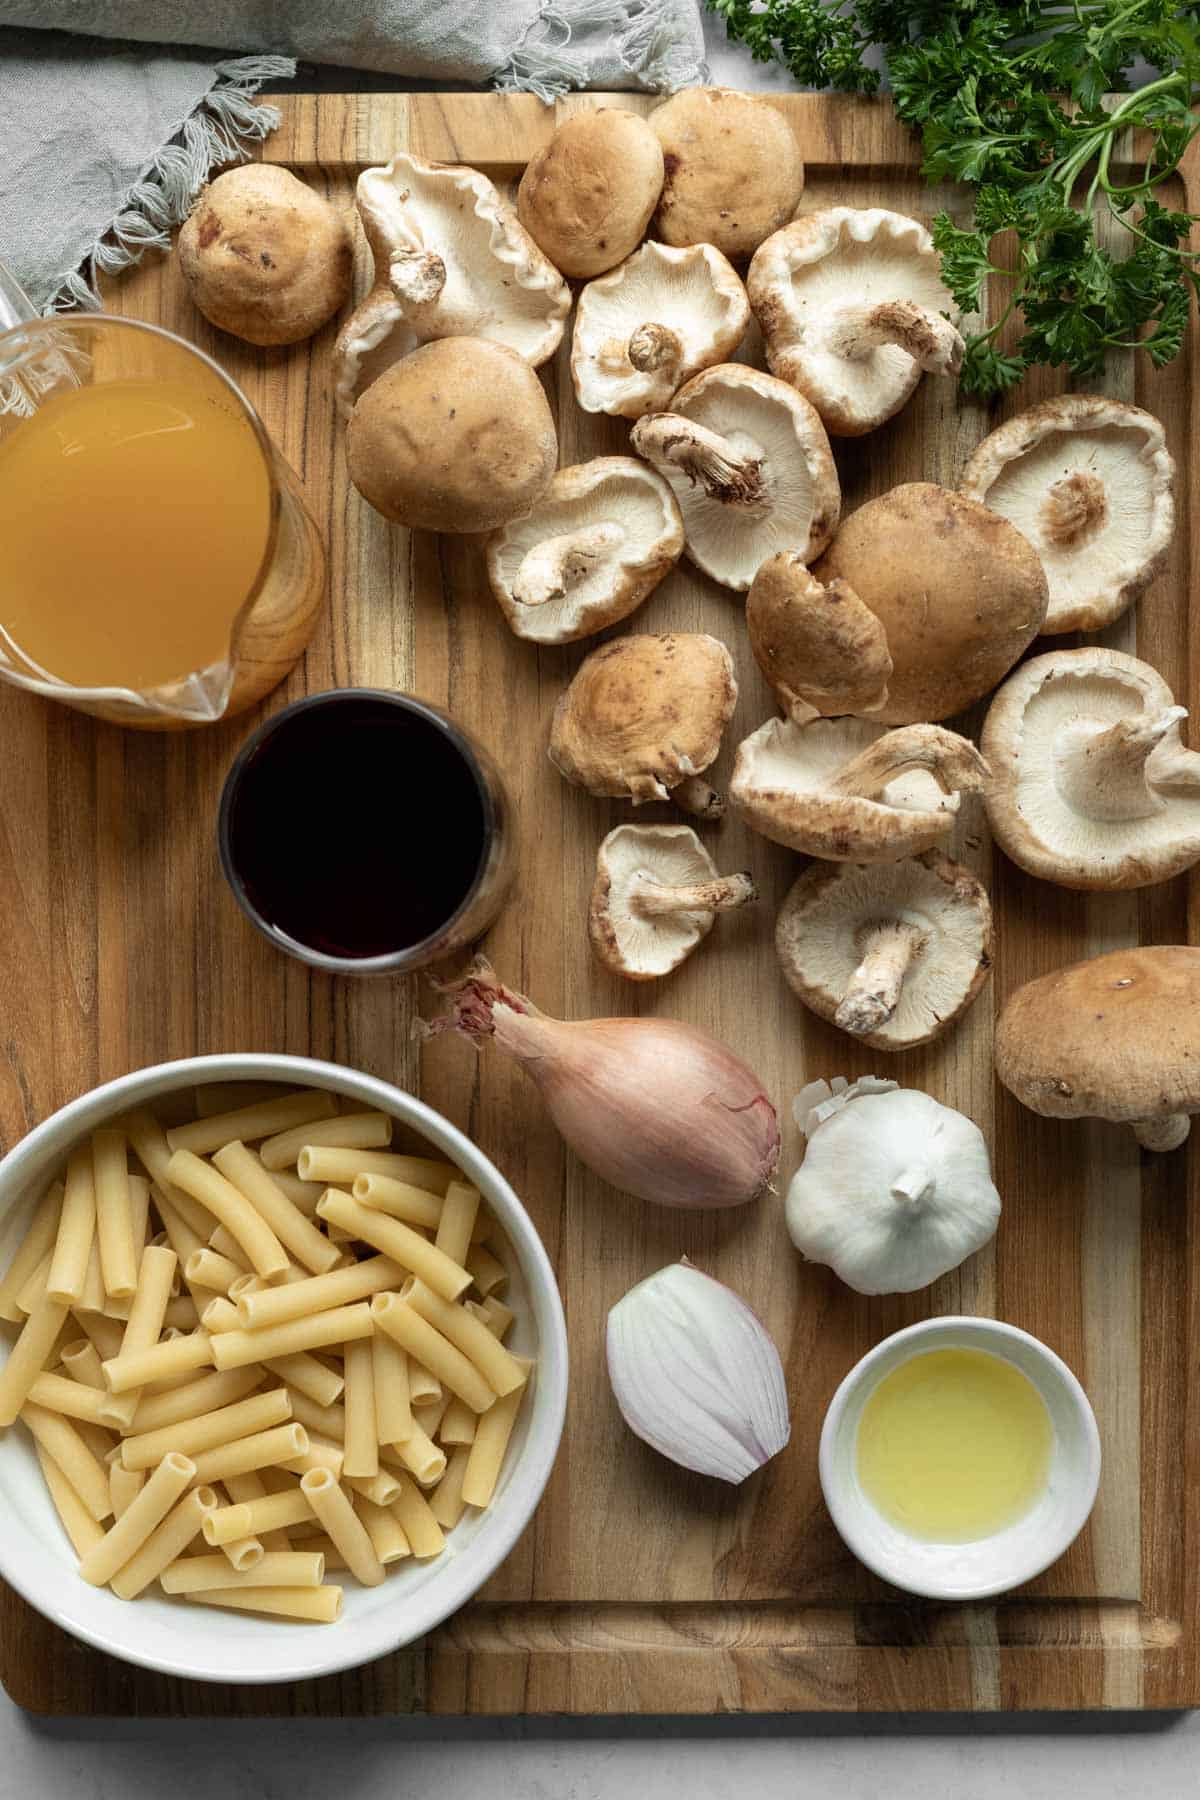 Ingredients needed for shiitake mushroom pasta laid out on a wooden board.